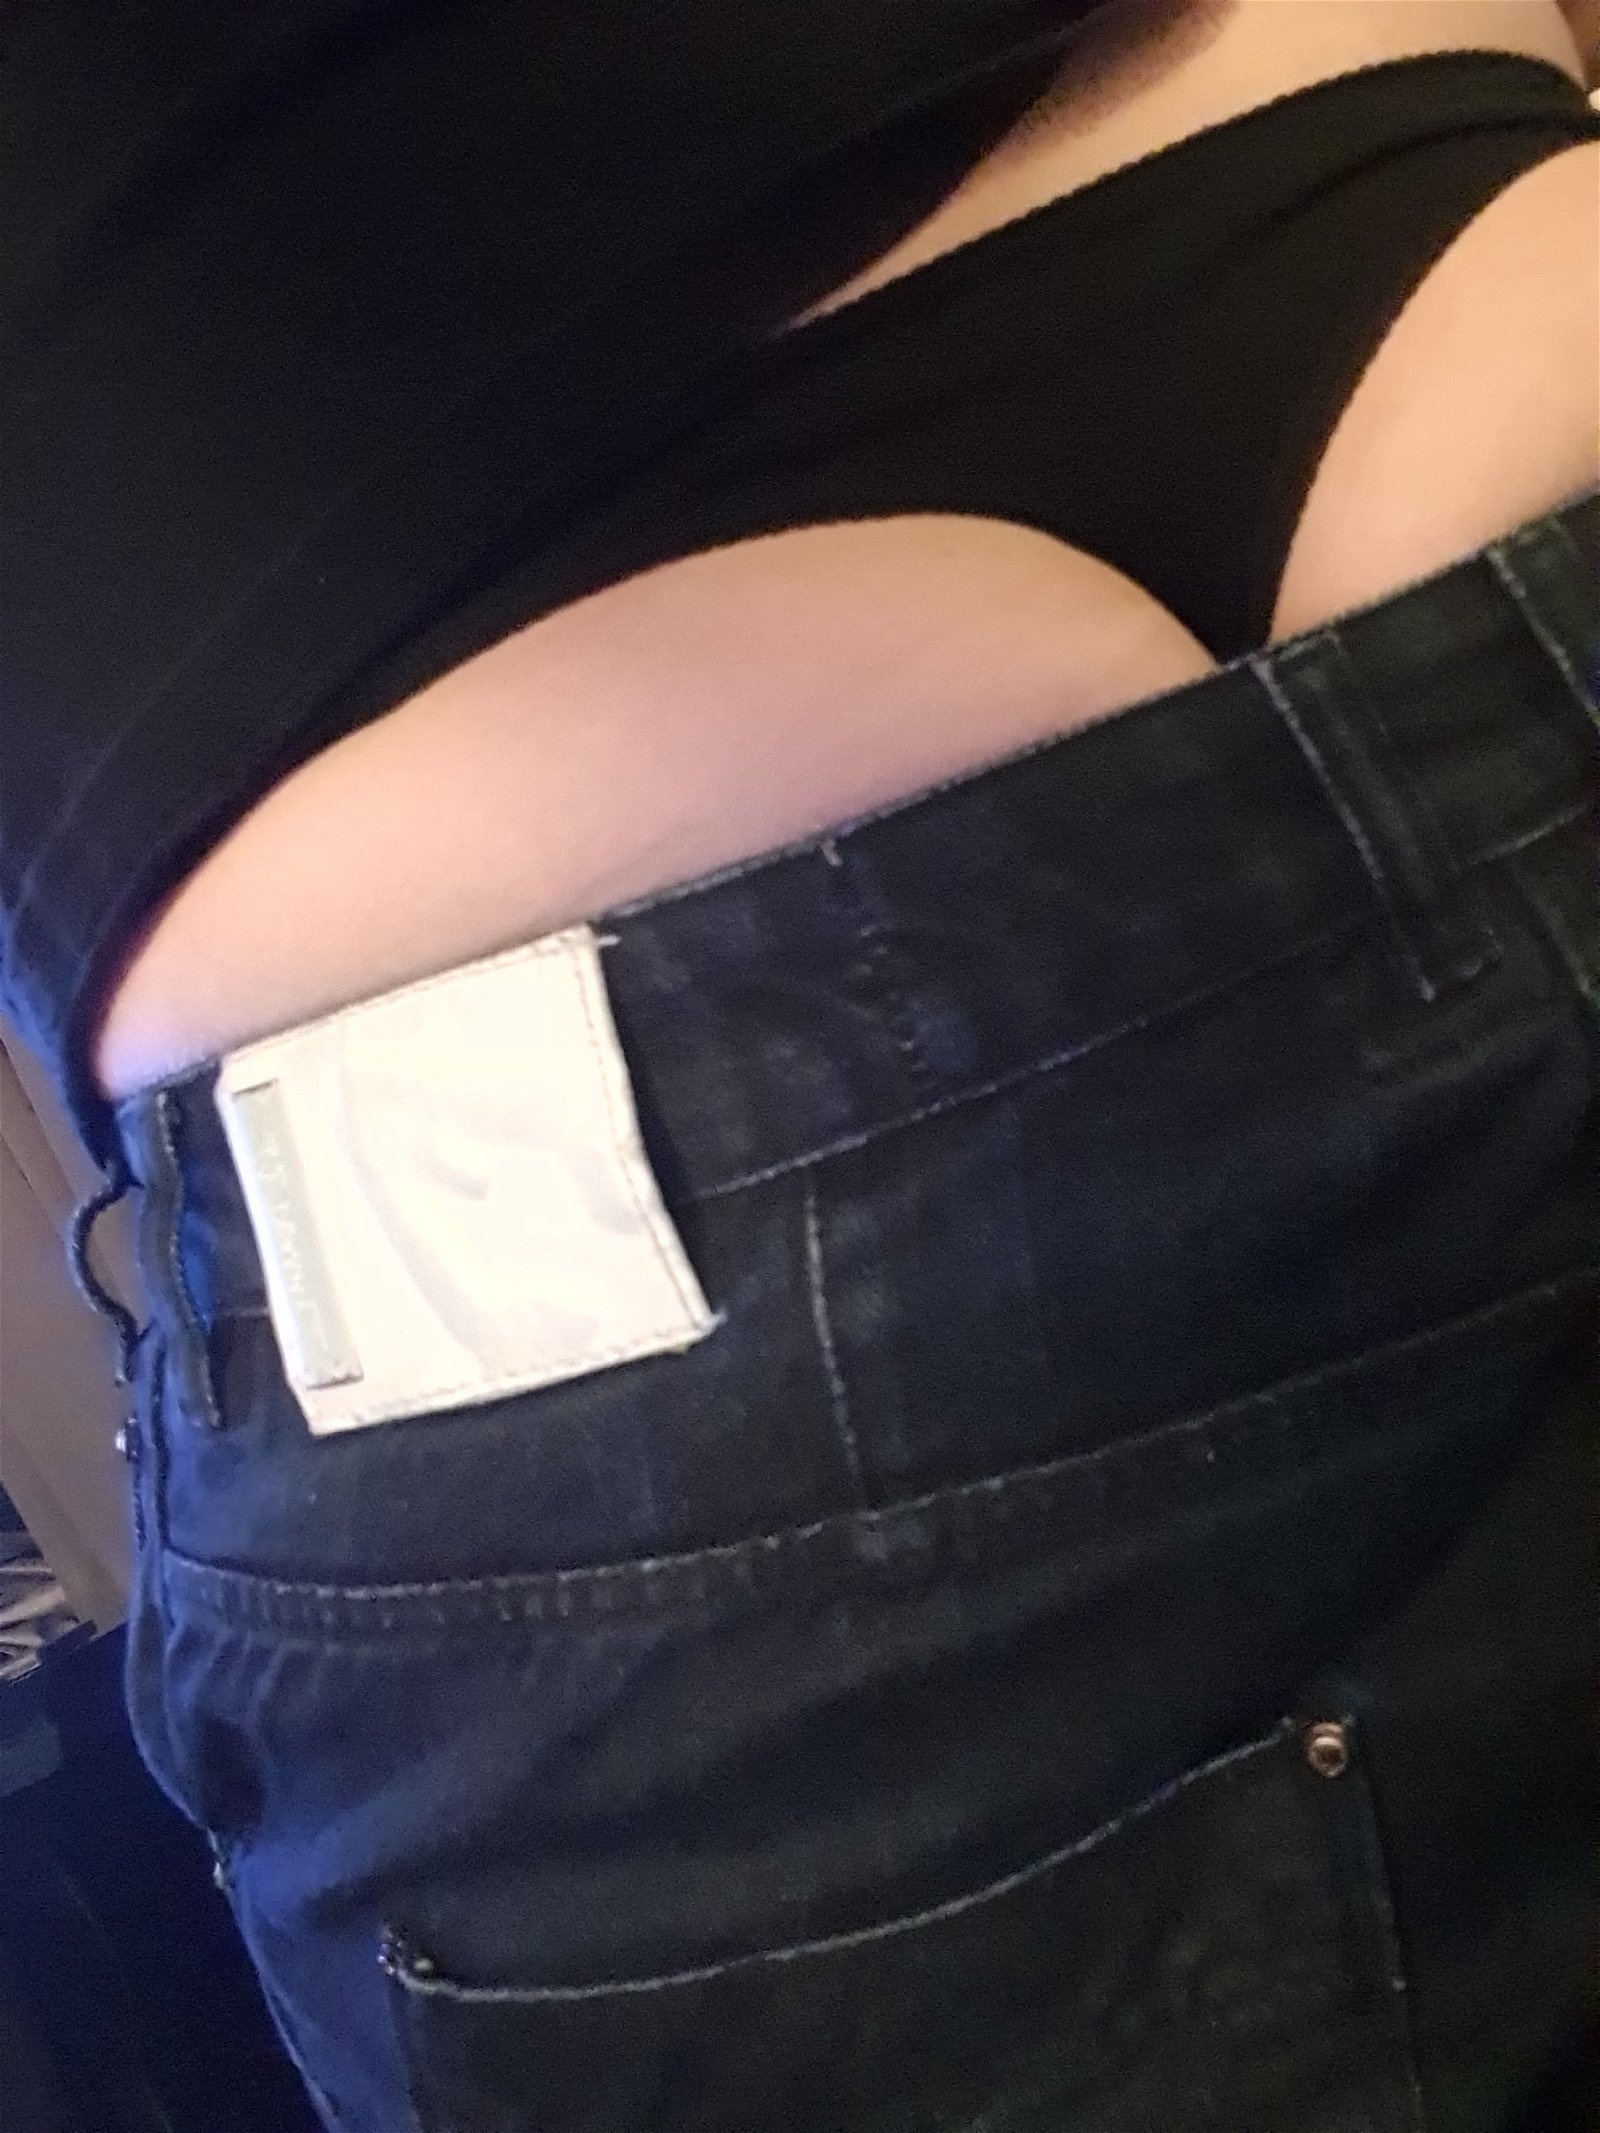 Photo by Corbek with the username @Corbek,  March 17, 2020 at 11:45 PM. The post is about the topic Sissy and the text says 'New comfy thong.

#ass #sissy #slut #spankme'